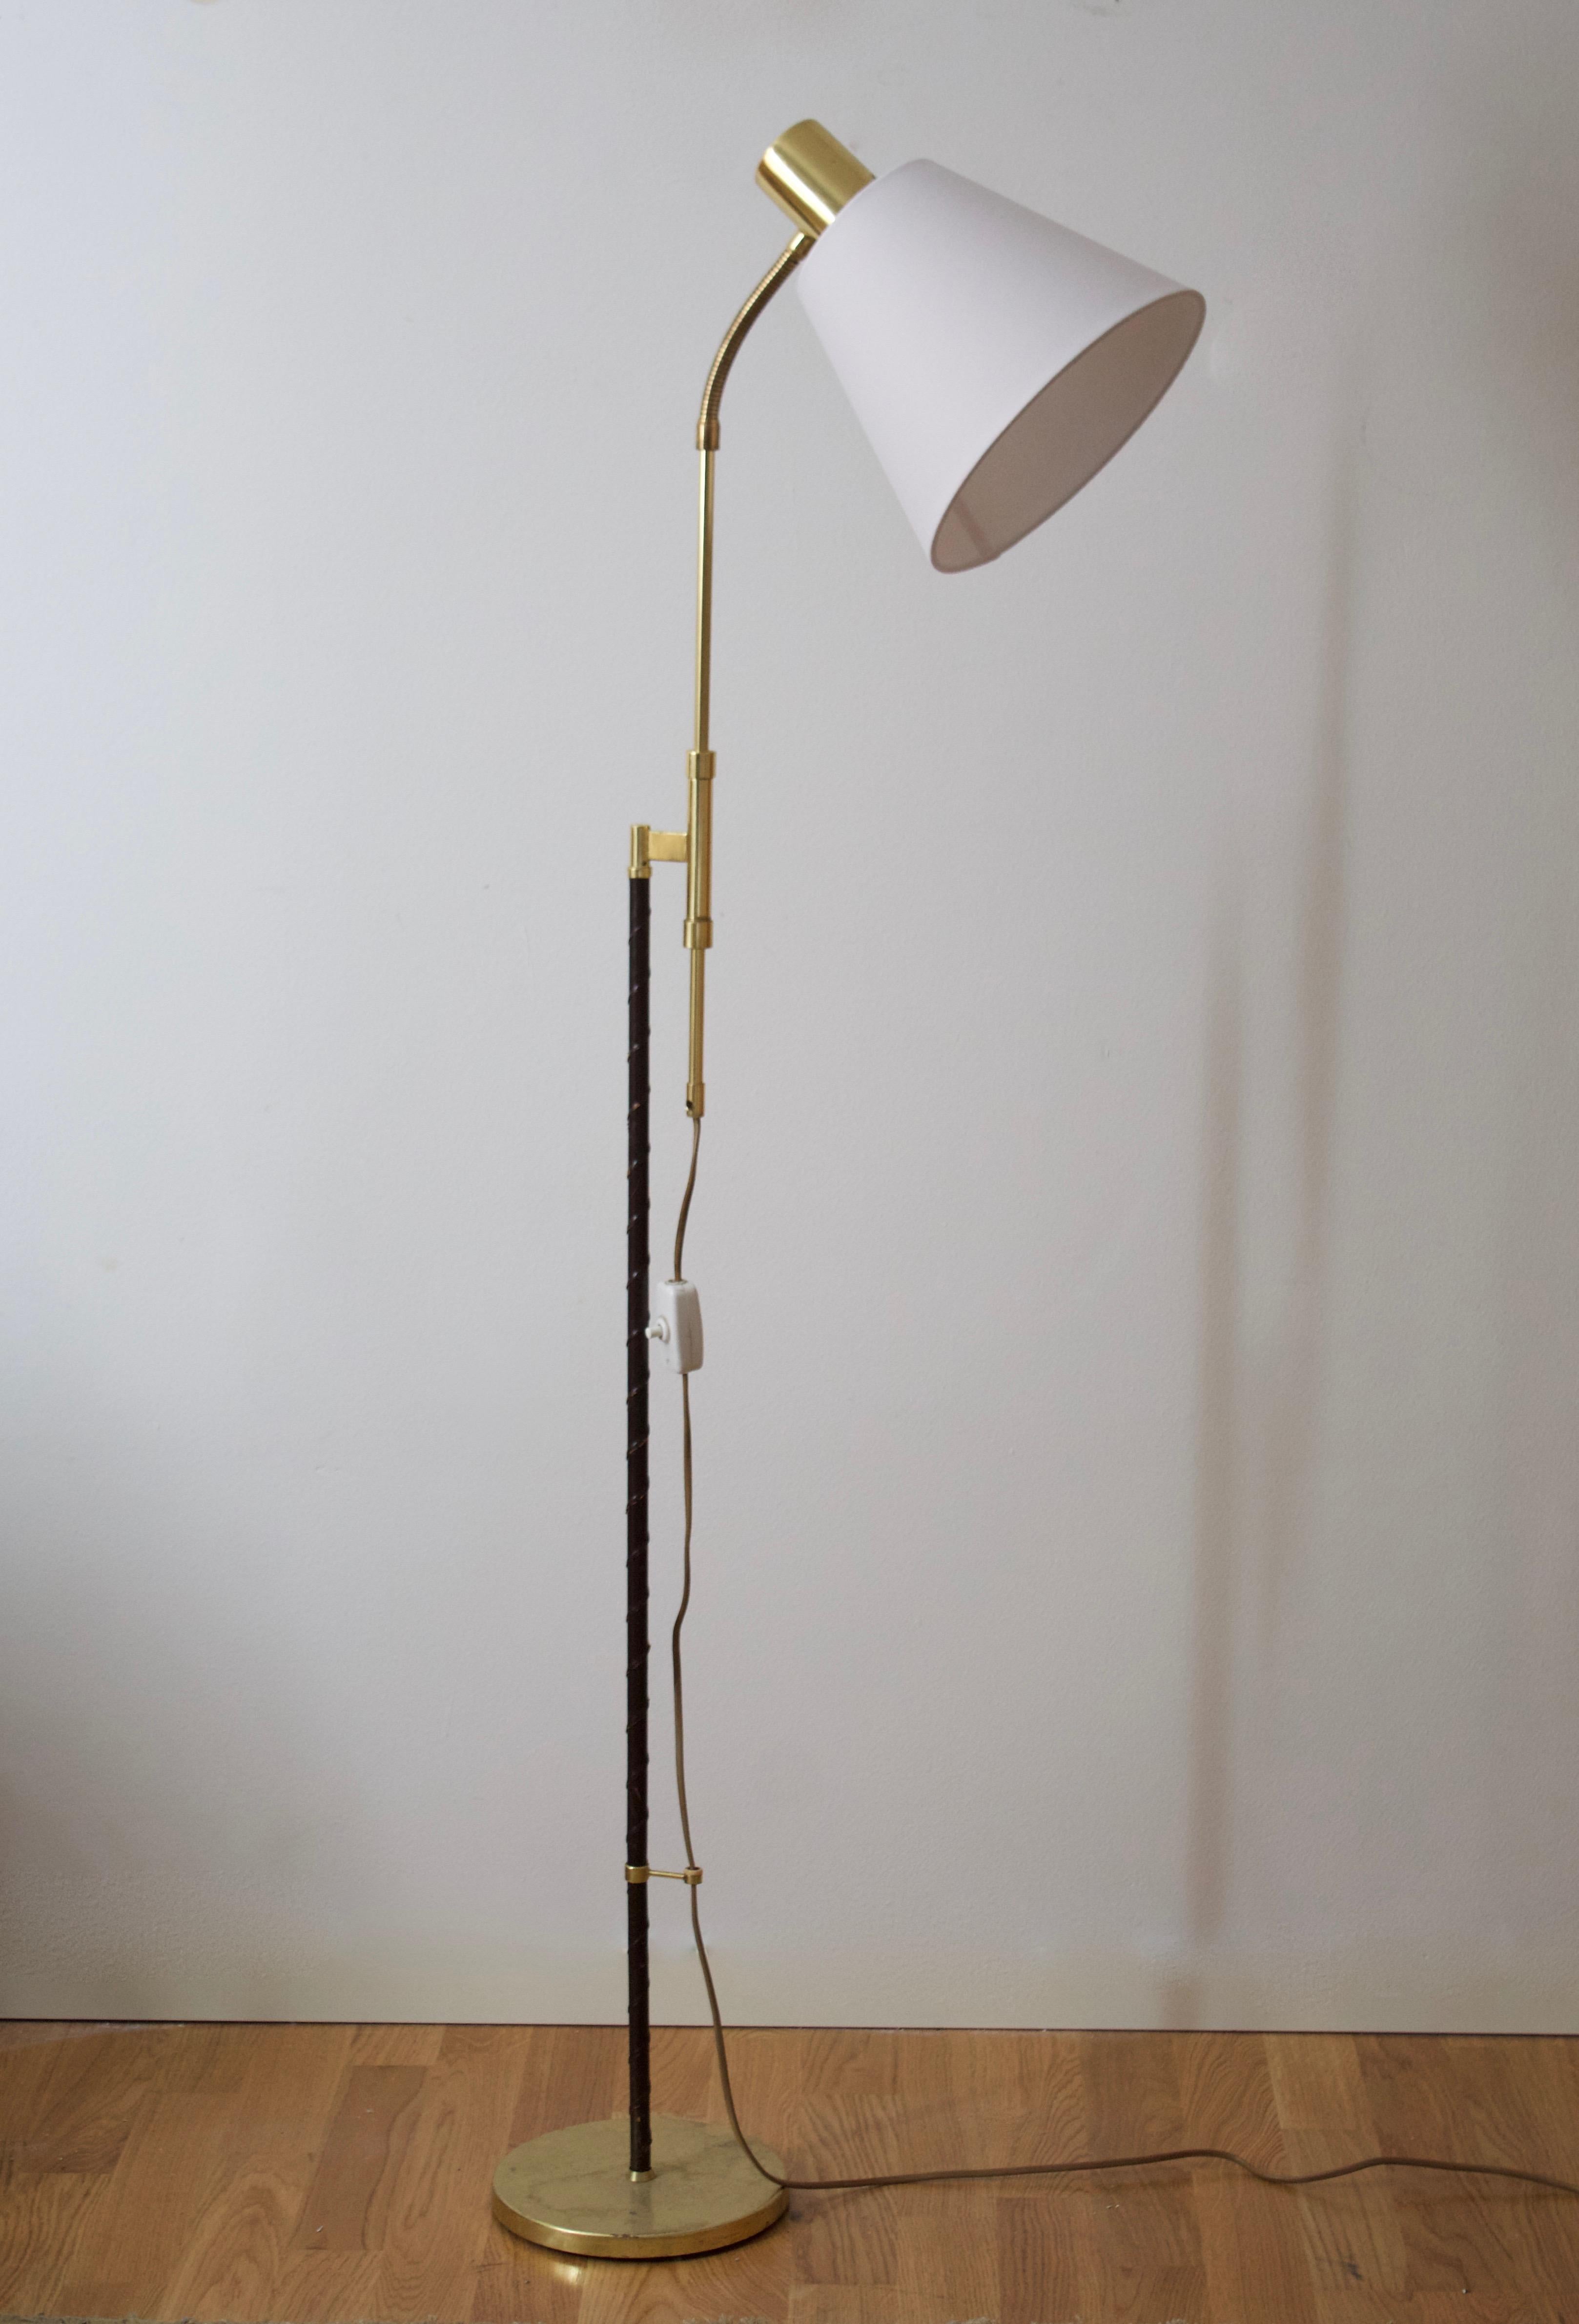 An adjustable floor lamp. Produced by Falkenbergs Belysning. Black leather-wrapped stem.

Other designers of the period include Hans Bergström, Hans-Agne Jacobson, Alvar Aalto, Josef Frank, and Paavo Tynell.